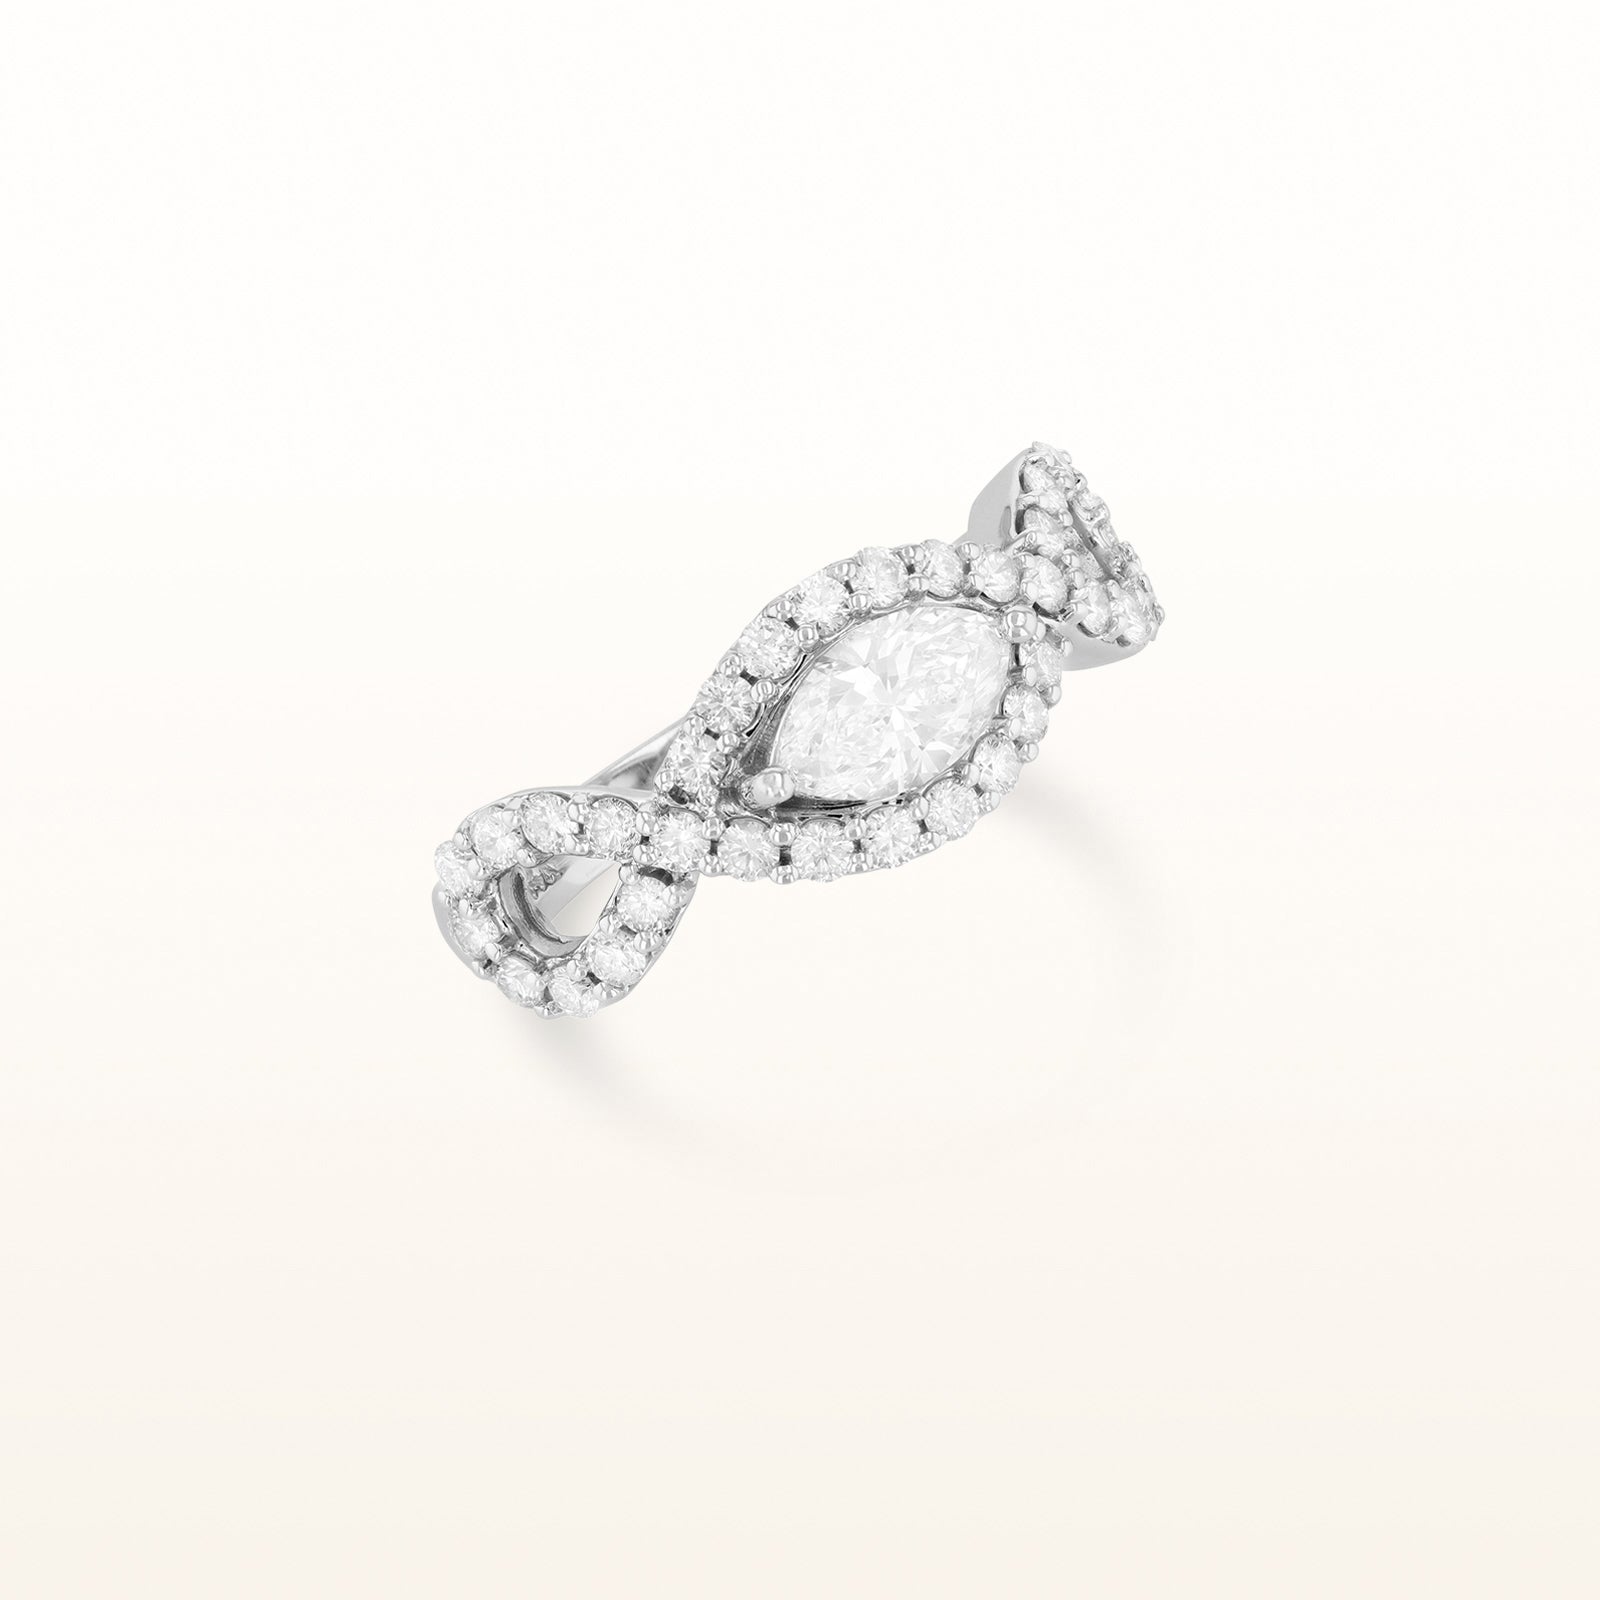 Marquise and Round Diamond Ribbon Ring in 14kt White Gold